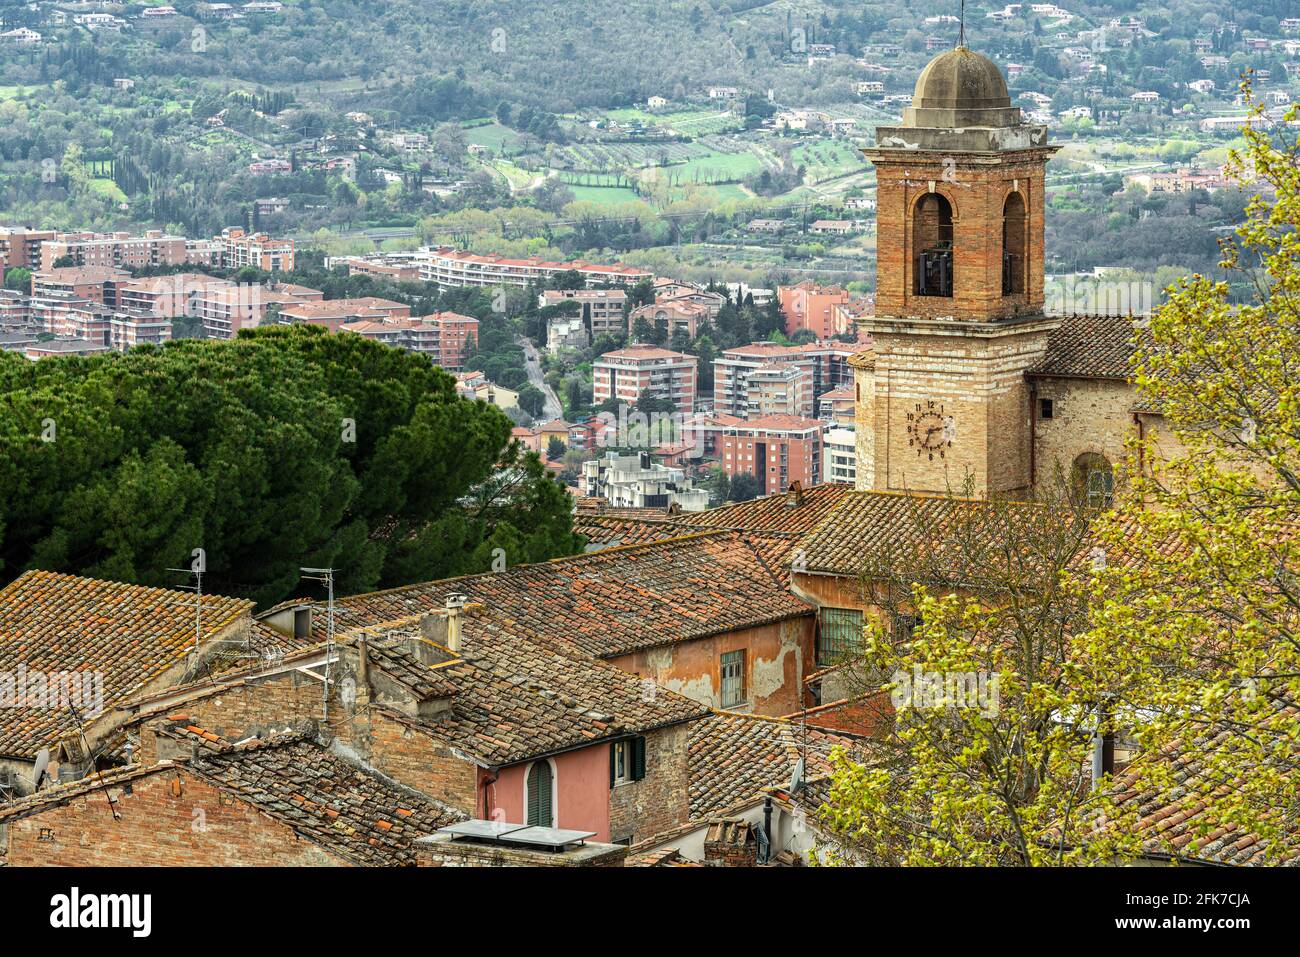 Urban landscape of the city of Perugia. Detail of the bell tower of the Santo Spirito church with the clock on one wall.   Perugia, Umbria, Italy Stock Photo